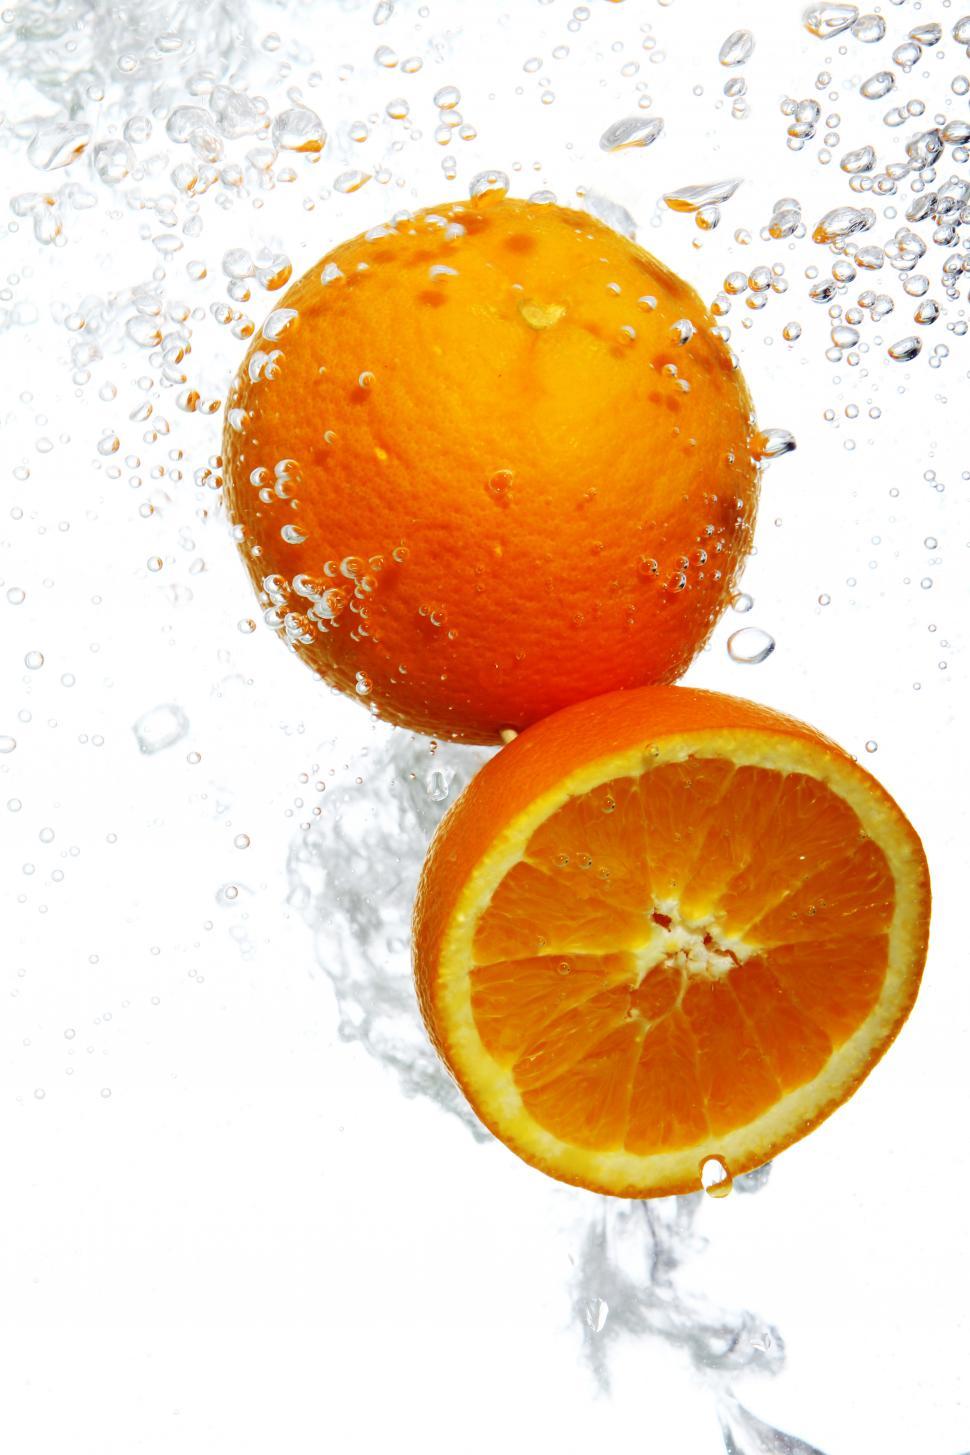 Free Image of Oranges dropped into water 